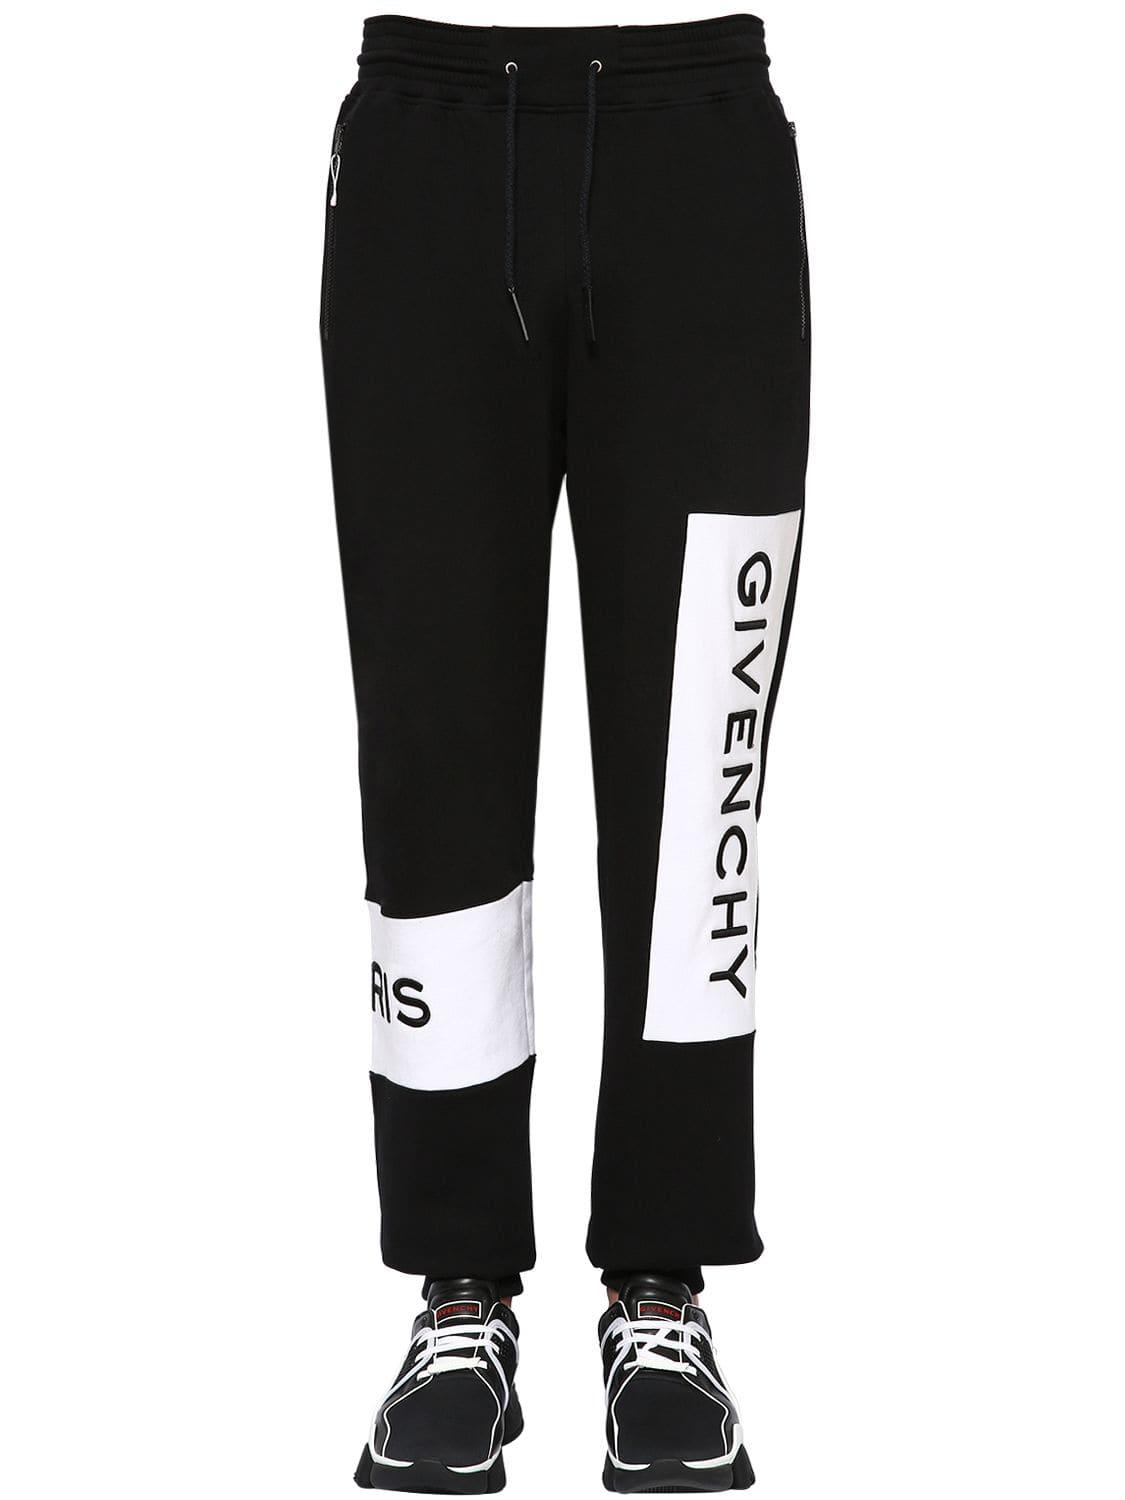 Lyst - Givenchy Jersey Track Suit Pants W/ Logo Bands in Black for Men